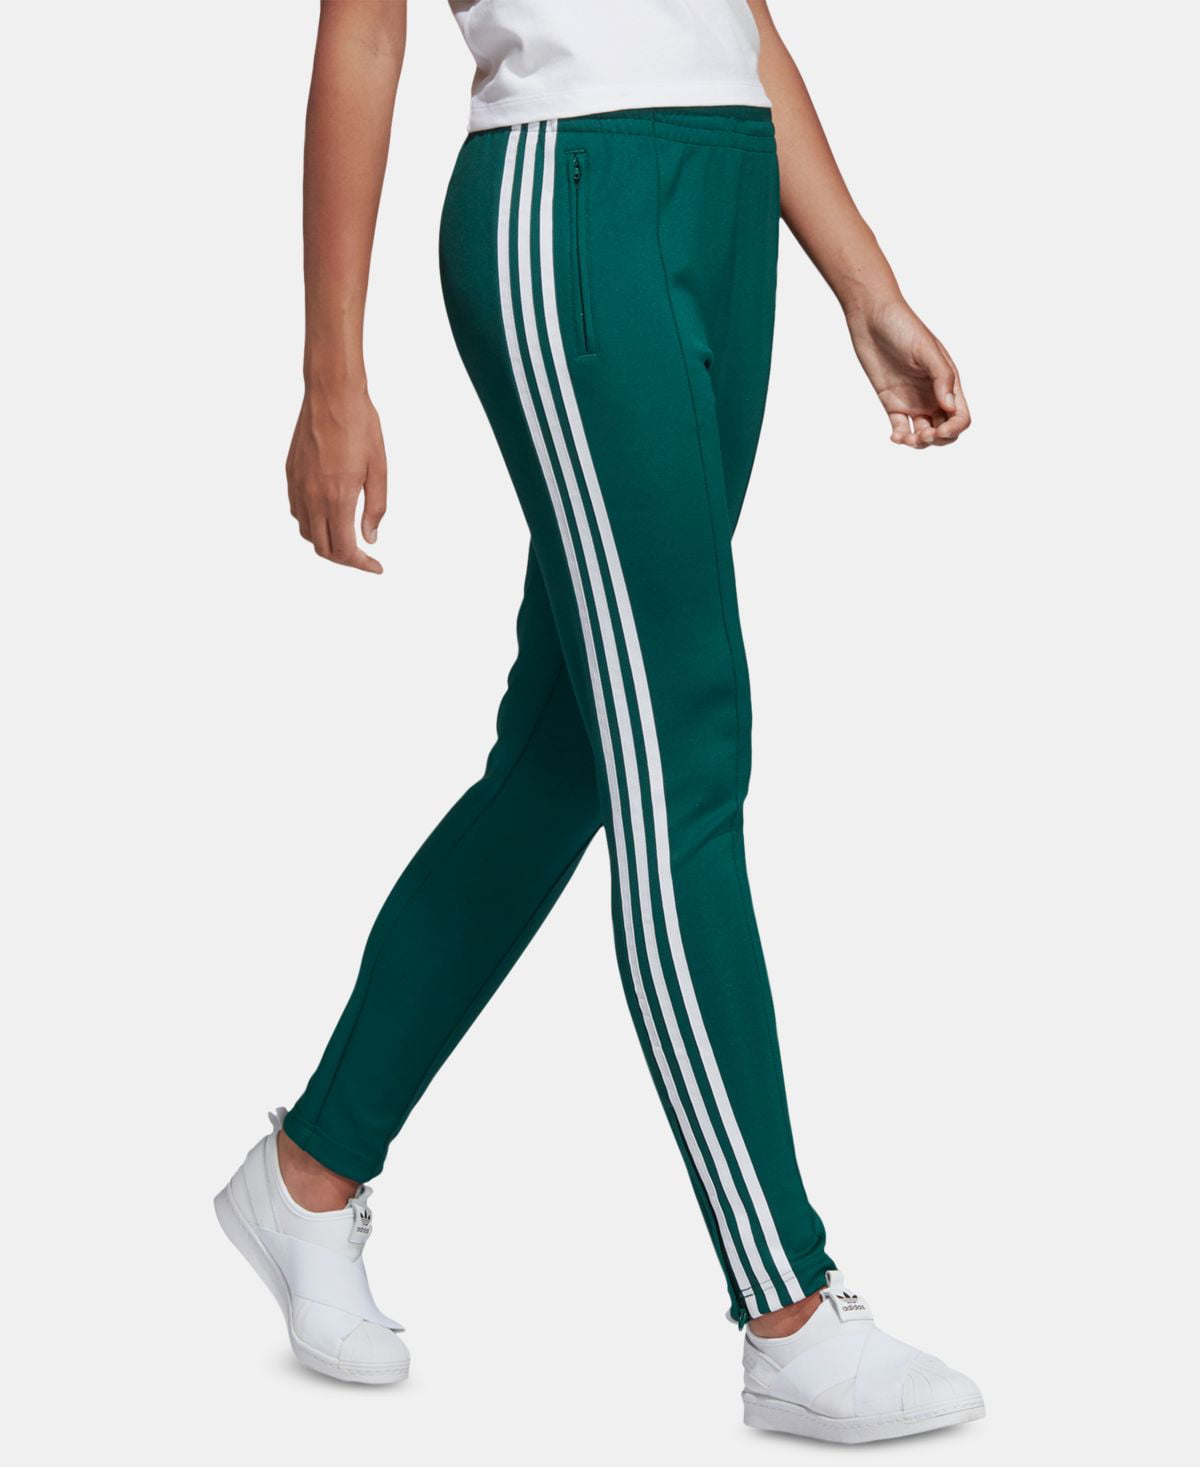 adidas Women\'s SST Track Pants Green Size X-Large